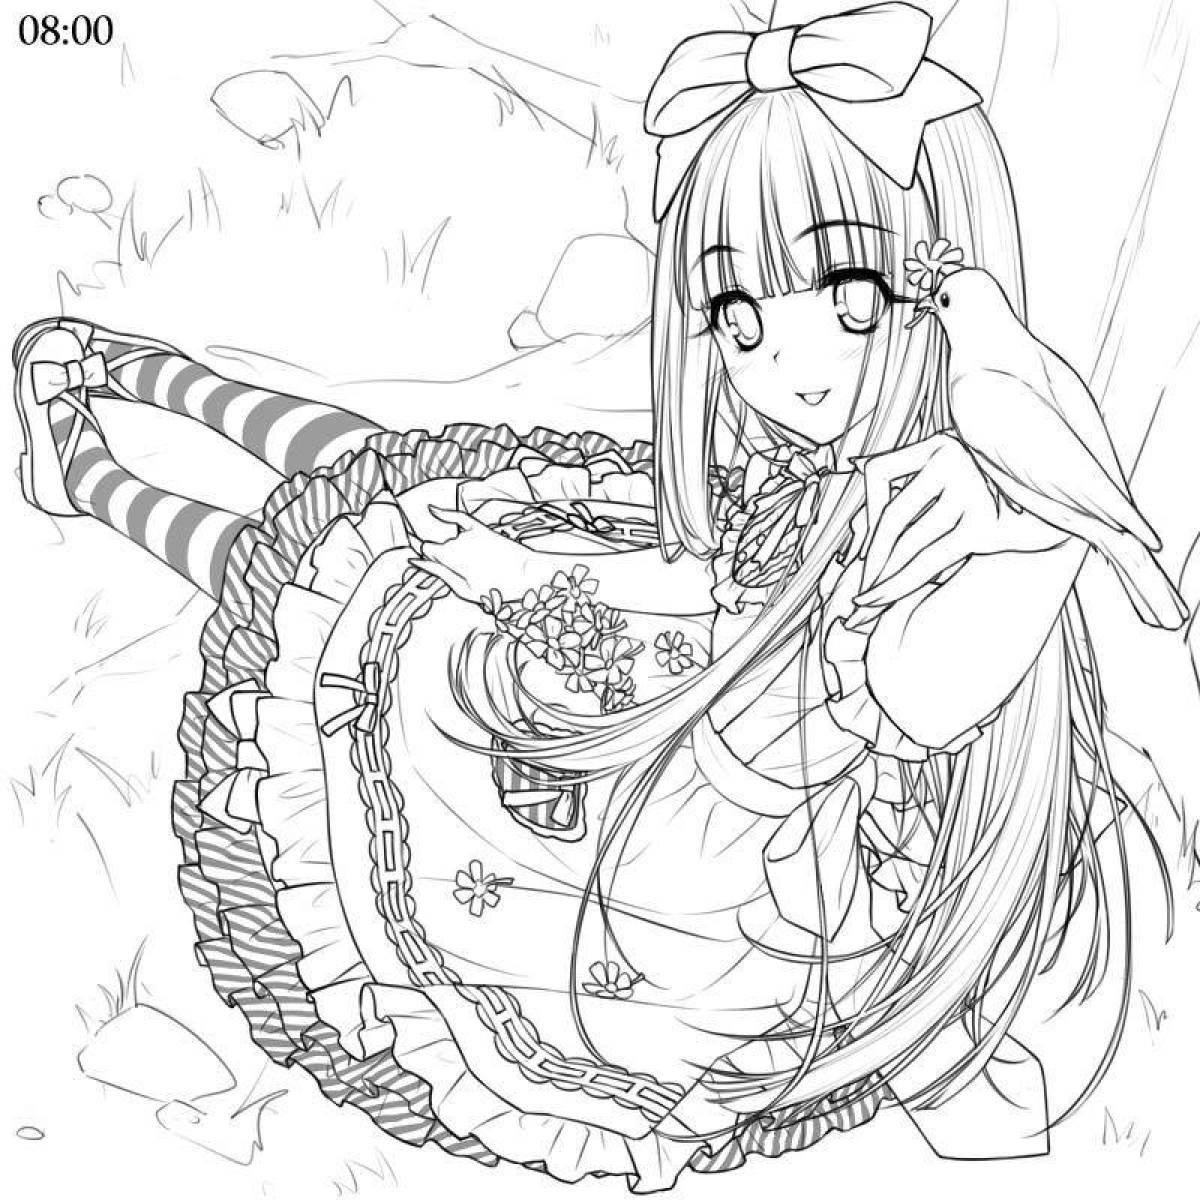 Delightful anime spiral coloring book